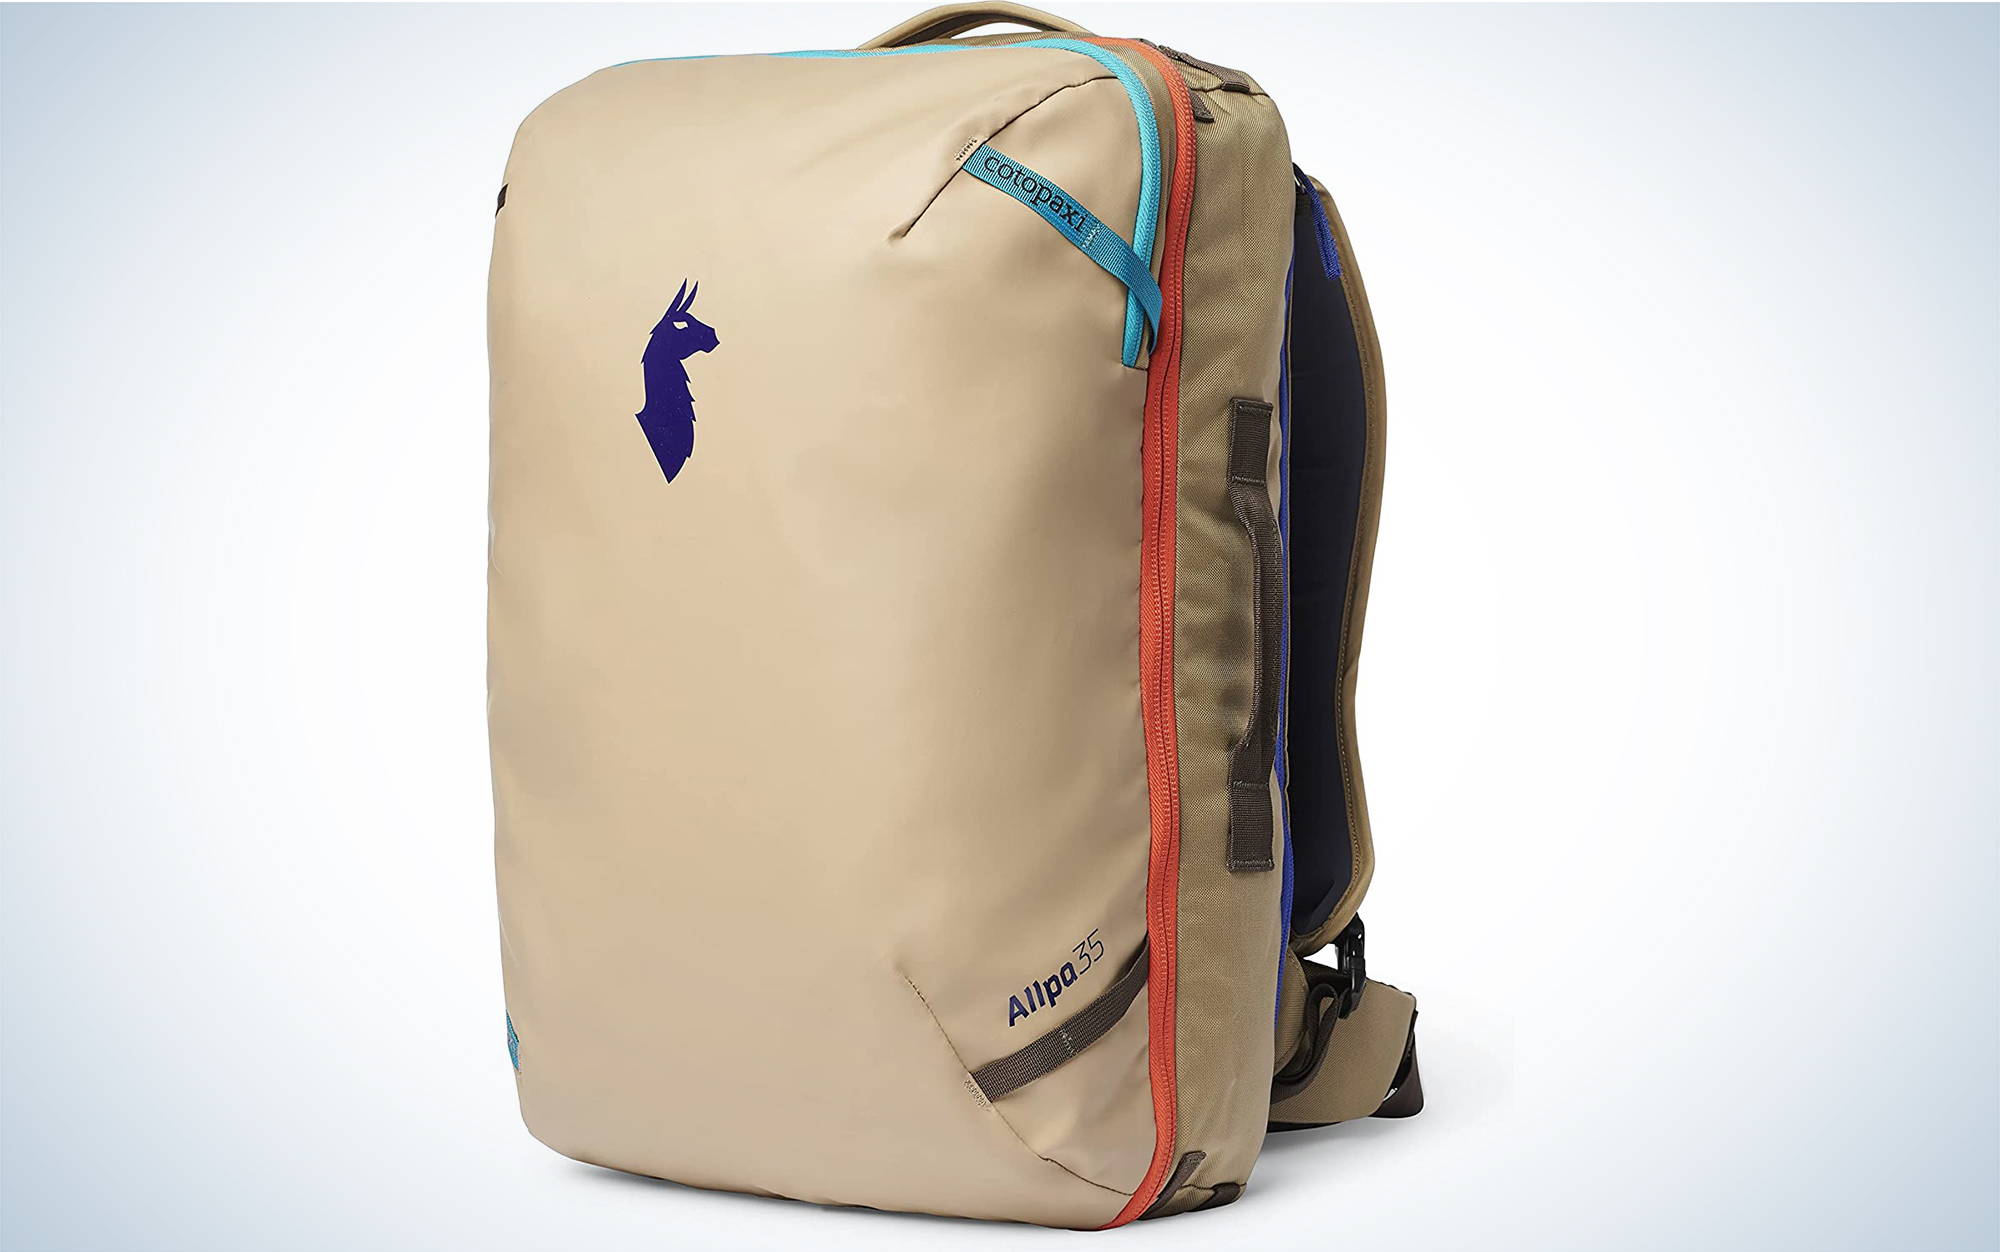 The Cotopaxi Allpa 35L is the best carry-on travel backpack